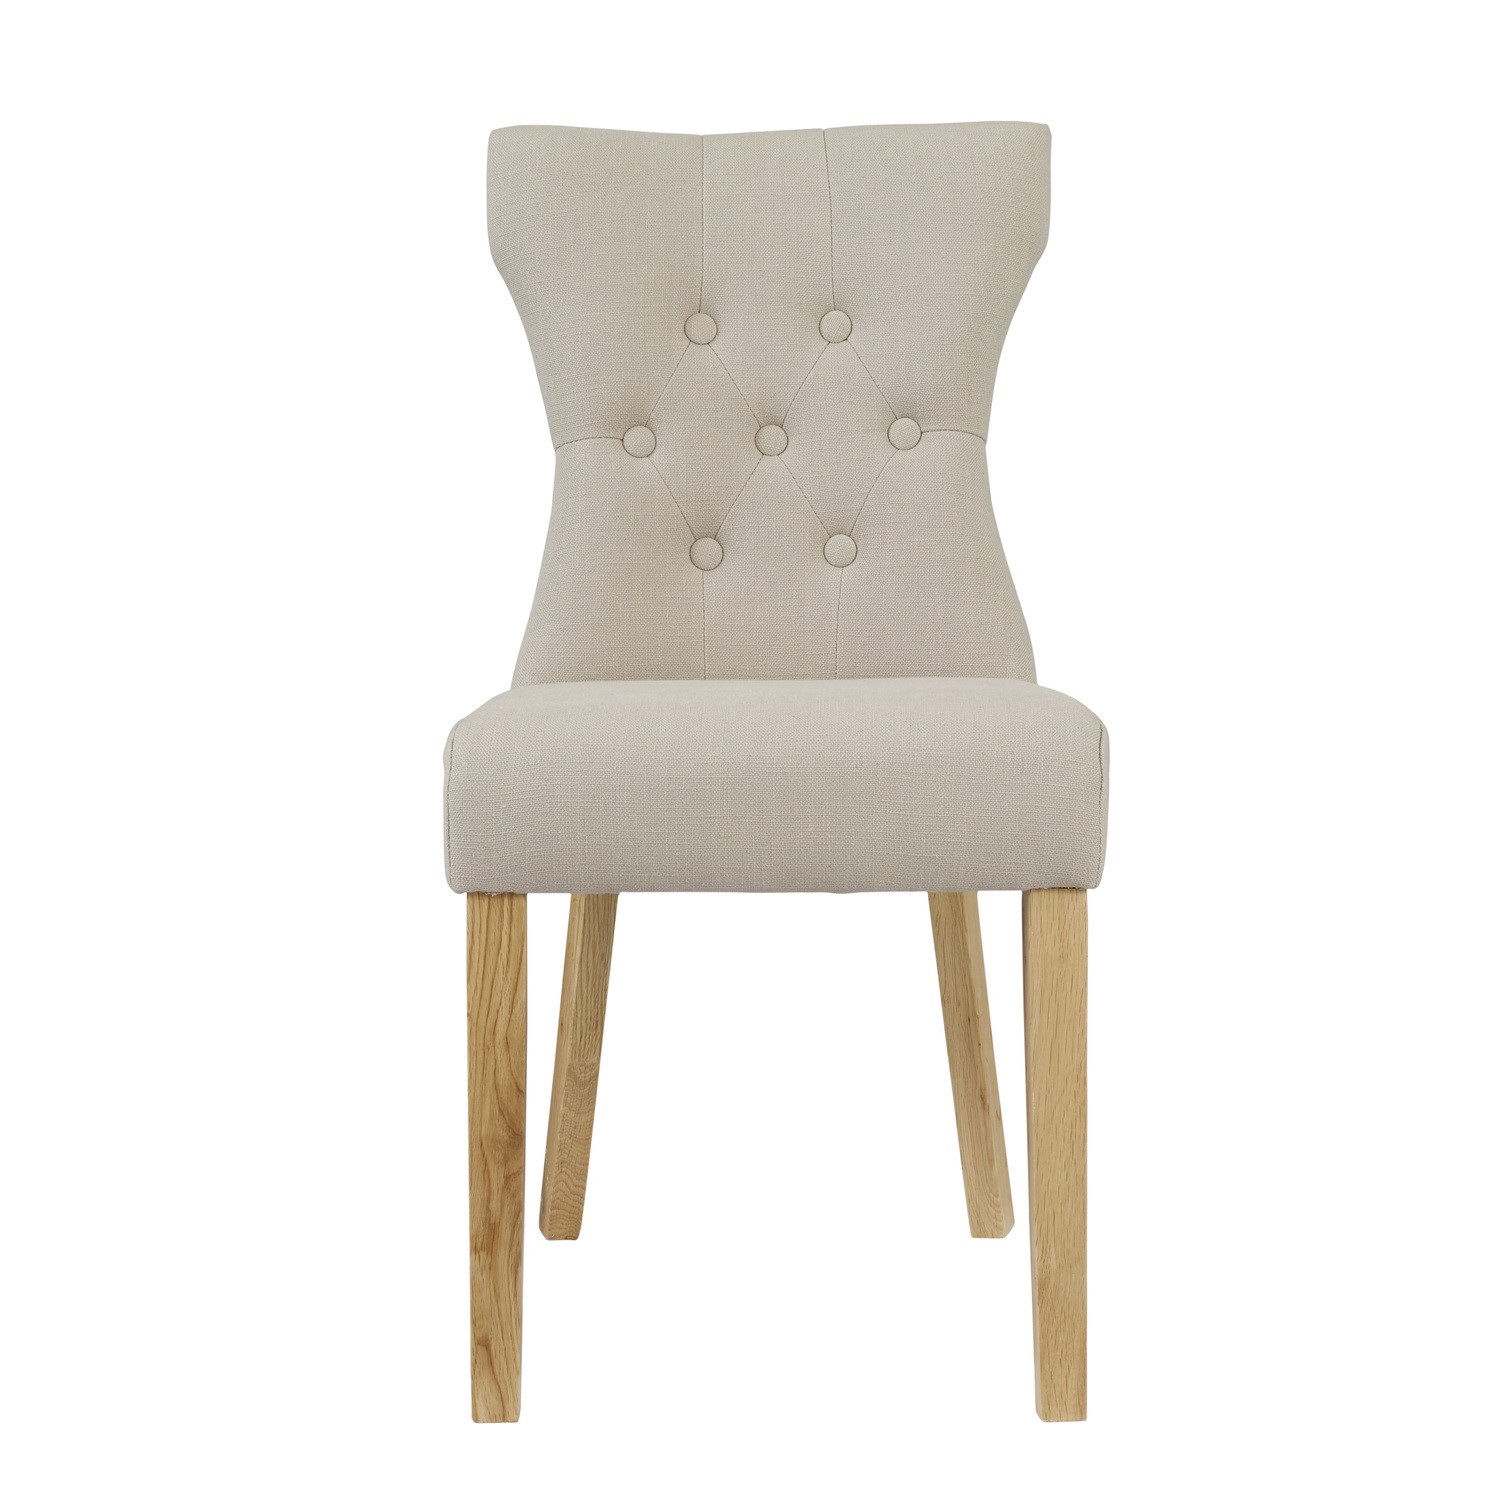 Read more about Set of 2 beige fabric dining chairs naples